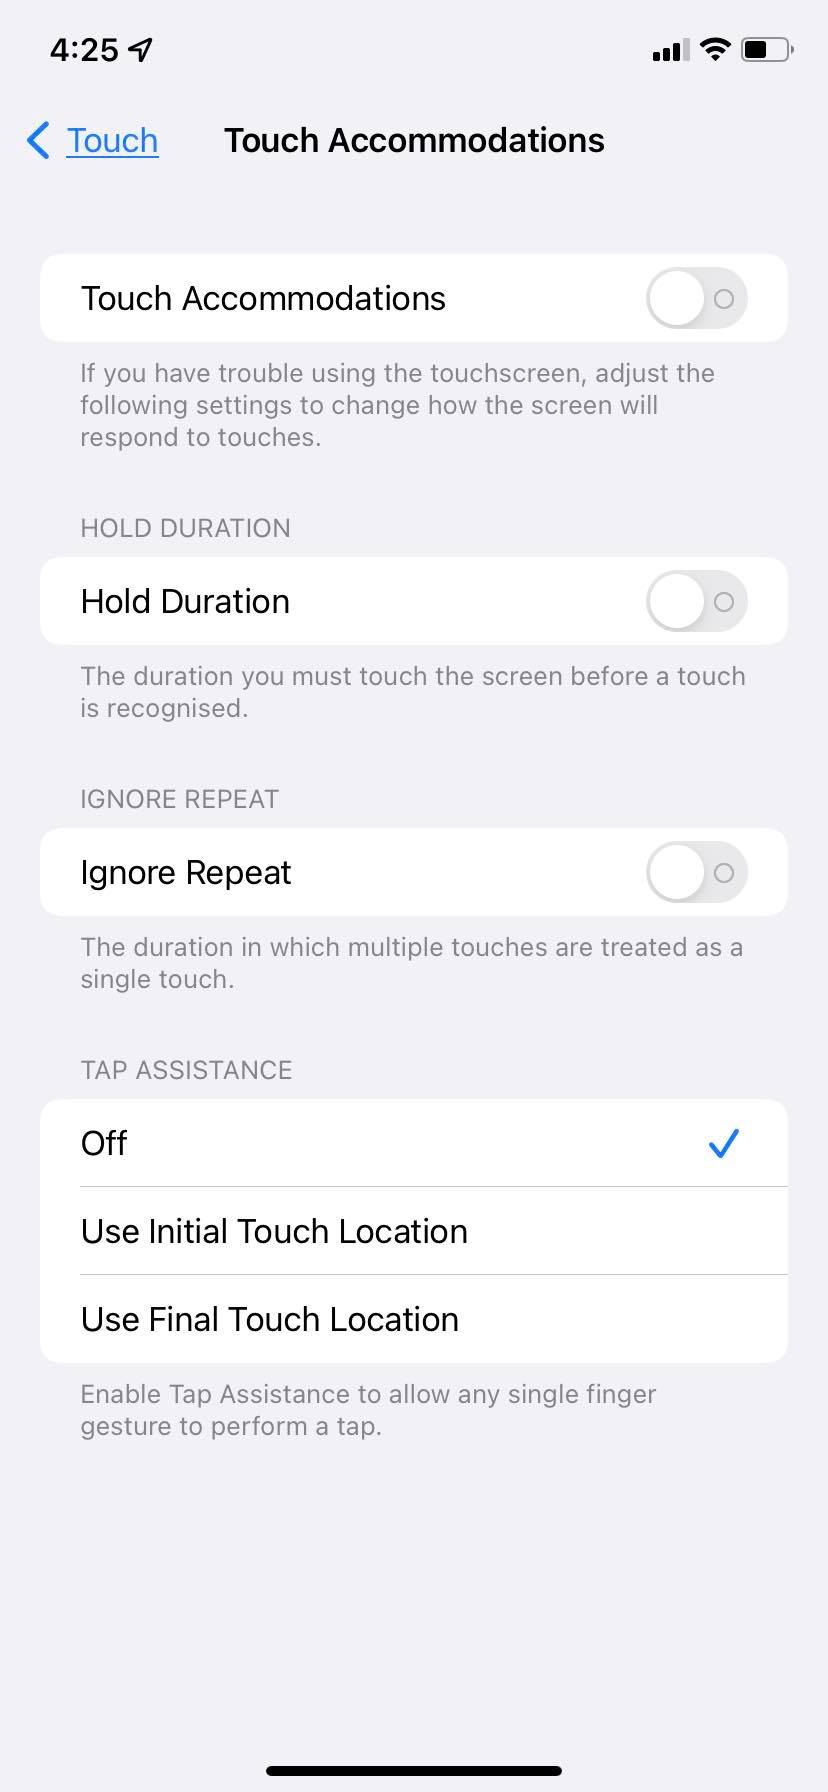 Screenshot of Apple Accessibility Touch Accommodations menu options